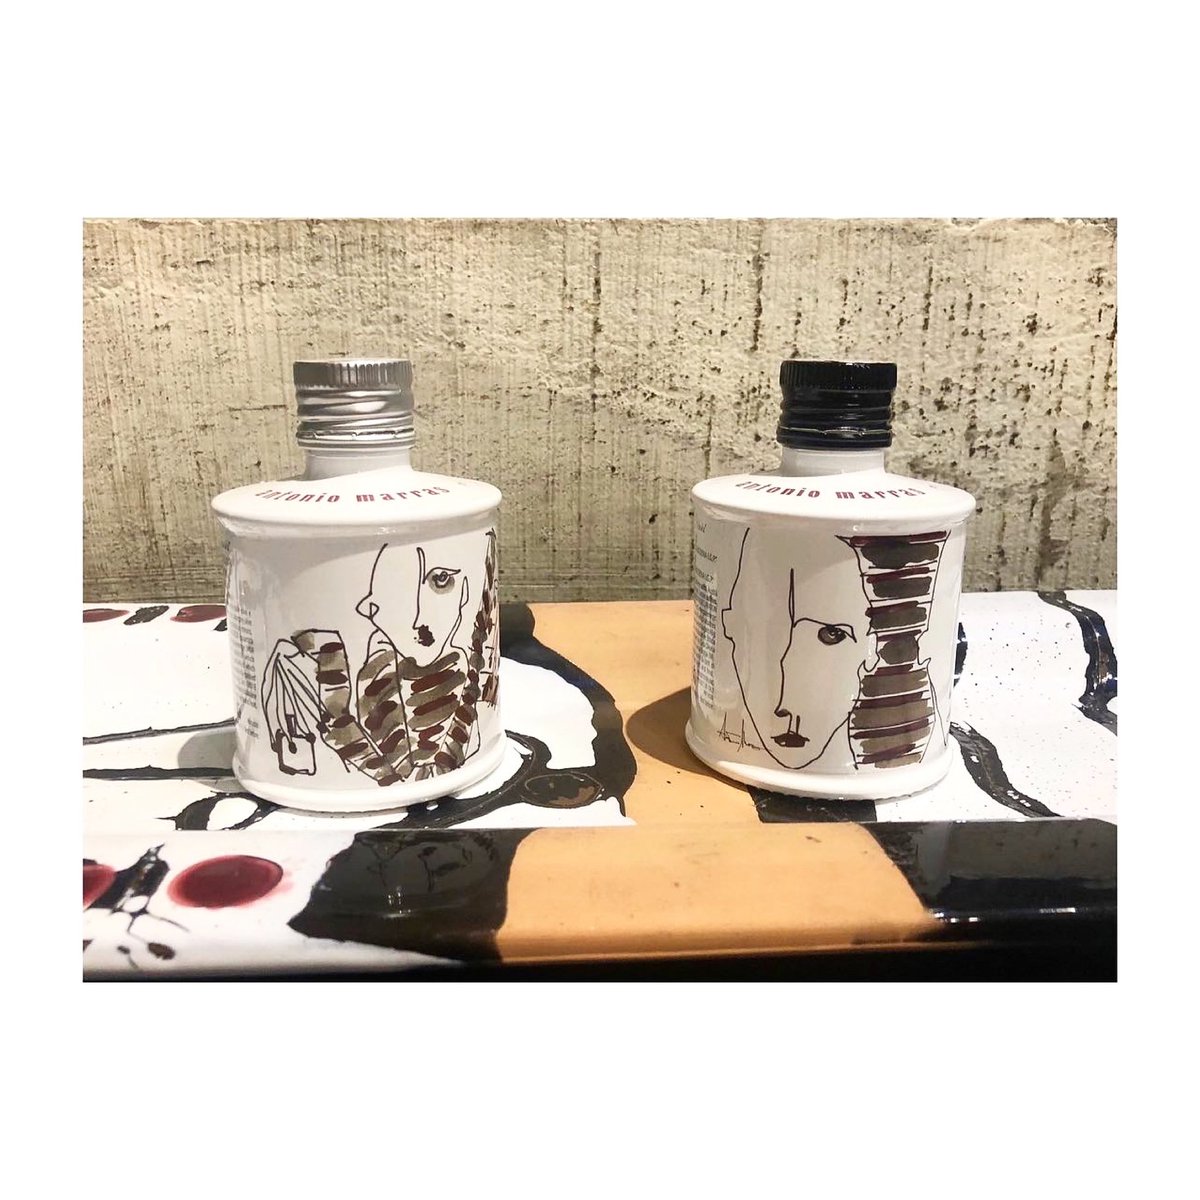 Oil and vinegar @antoniomarrasofficial by @galateofriends #capsulecollection #signature #galateoandfriends @antoniomarras_personal #extravirginoliveoil #taggiasca #foodandfashion @foodlovesfashion_ #onlineshopping #brandidentity #coolest